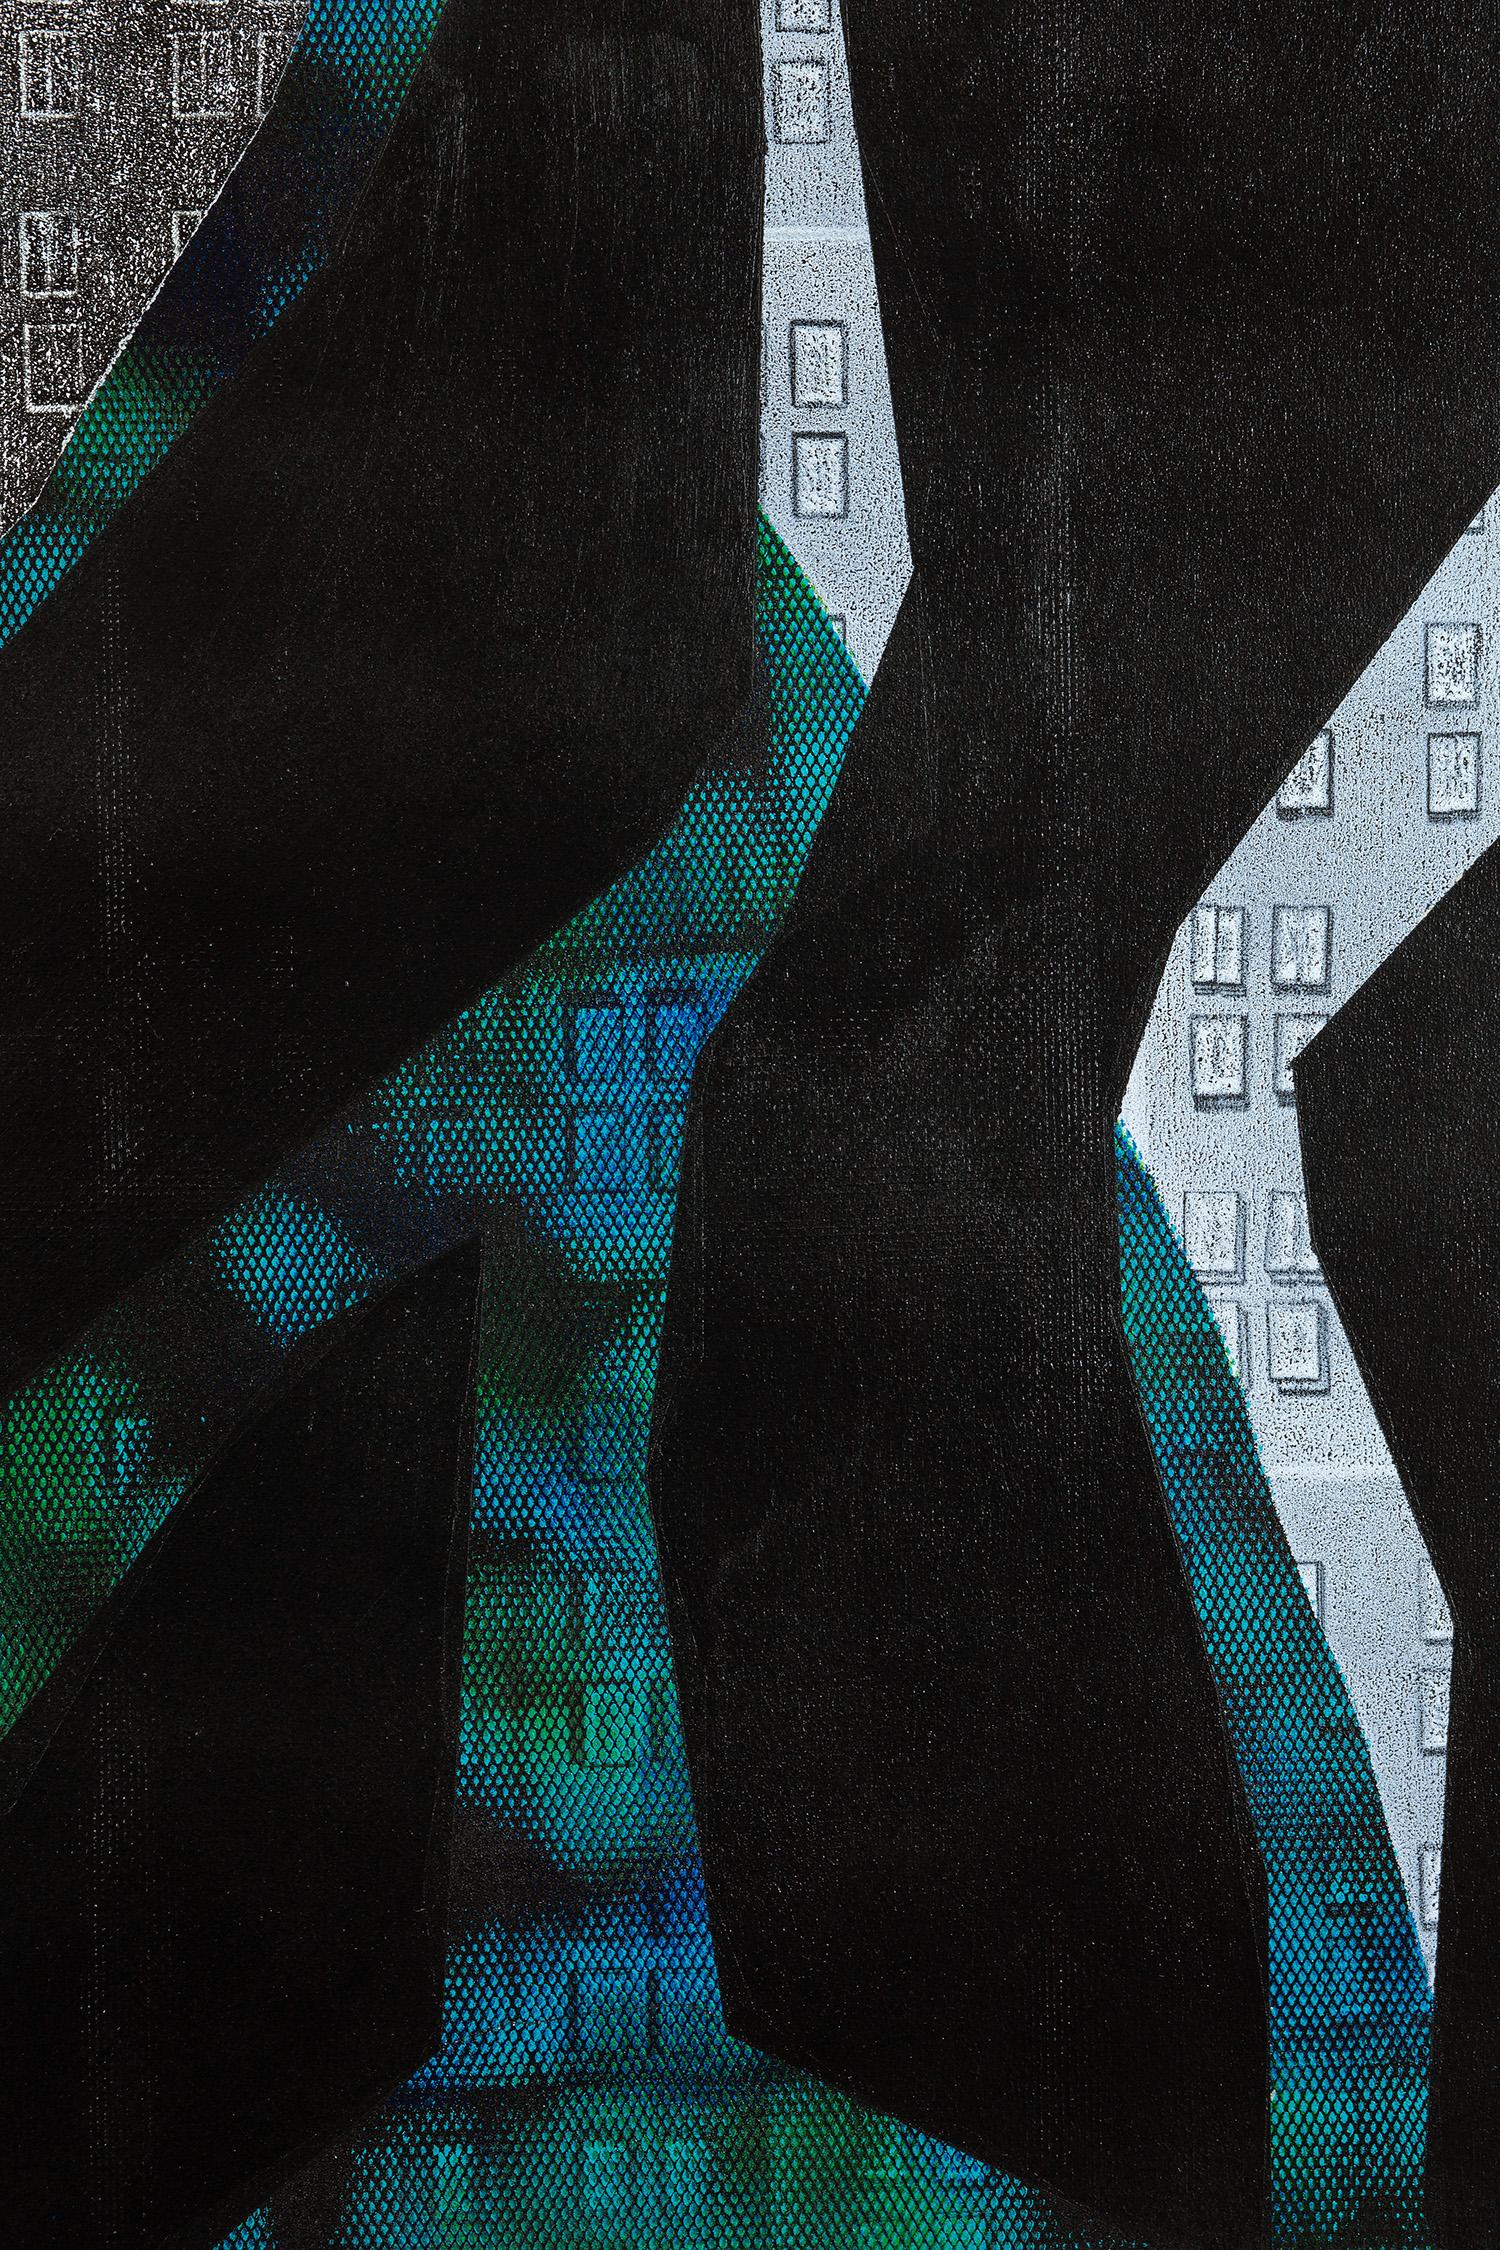 Tatiana Flis’ “A Satellite’s View” is a 48 x 36 inch abstract acrylic painting created with multiple monoprinting methods on a birch wood panel. Bold black graphic shapes overlay a rectangle window pattern which is repeated in black, white, teal